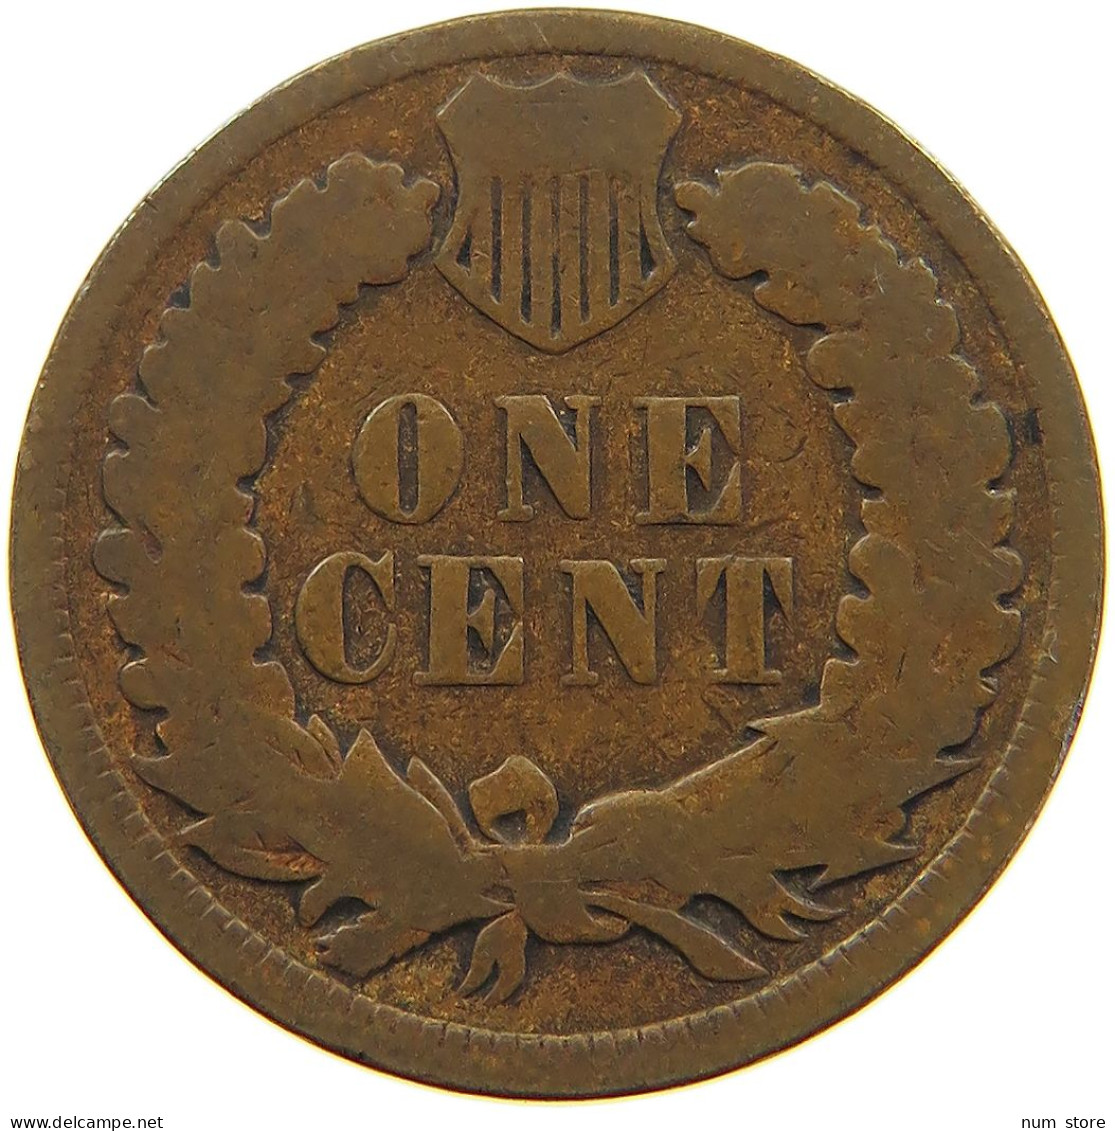 UNITED STATES OF AMERICA CENT 1898 INDIAN HEAD #a063 0193 - 1859-1909: Indian Head